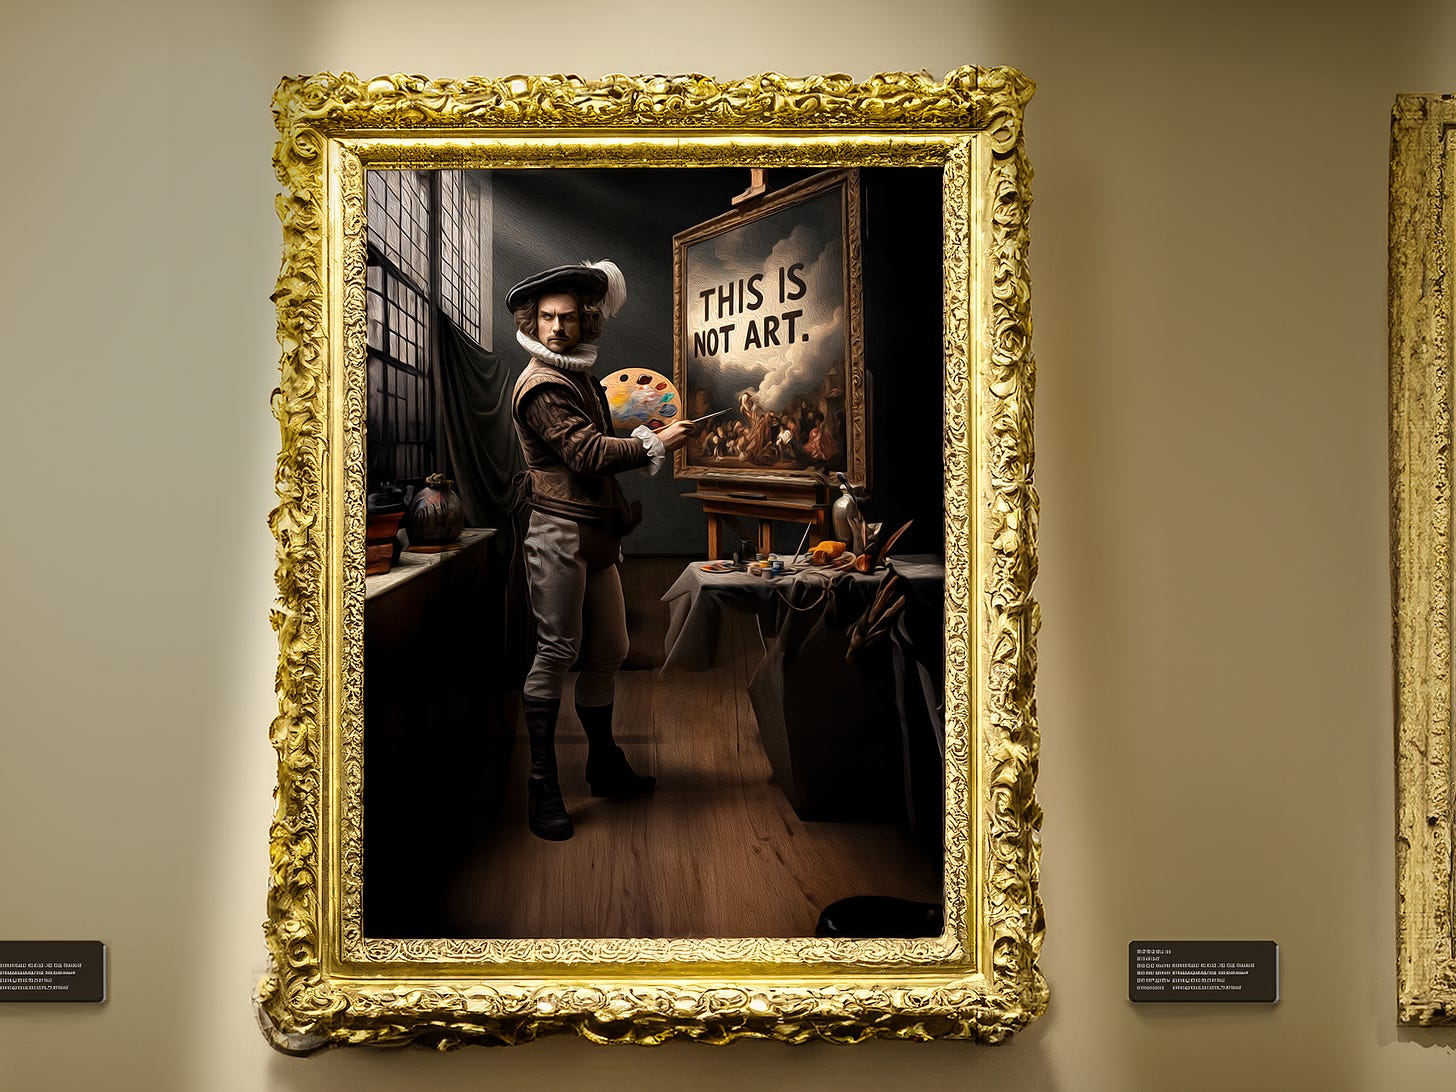 This digital image by the author, "Ceci n'est pas Dada" depicts a man painting at an easel in an ornate gold frame. The title "THIS IS NOT ART." on the canvas, along with the artwork's actual title referencing Magritte, creates a multi-layered irony. The man's 17th century attire and the painting's chiaroscuro lighting evoke Rembrandt, while surreal, anachronistic elements represent the "Cyber-Dada" style. The piece subverts artistic conventions on multiple levels: classical techniques juxtaposed with digital media, Dadaism's subversive spirit reimagined for the digital age, and the ironic title suggesting the artwork is not Dada while embodying its essence. This creates a thought-provoking commentary on art, authenticity, and perception, mirroring the artist's experience as an autistic individual challenging societal norms. "Ceci n'est pas Dada" invites viewers to question the nature of art and identity, just as Dada subverted classical art, and Cyber-Dada now subverts Dada itself. Digital tools included AI.